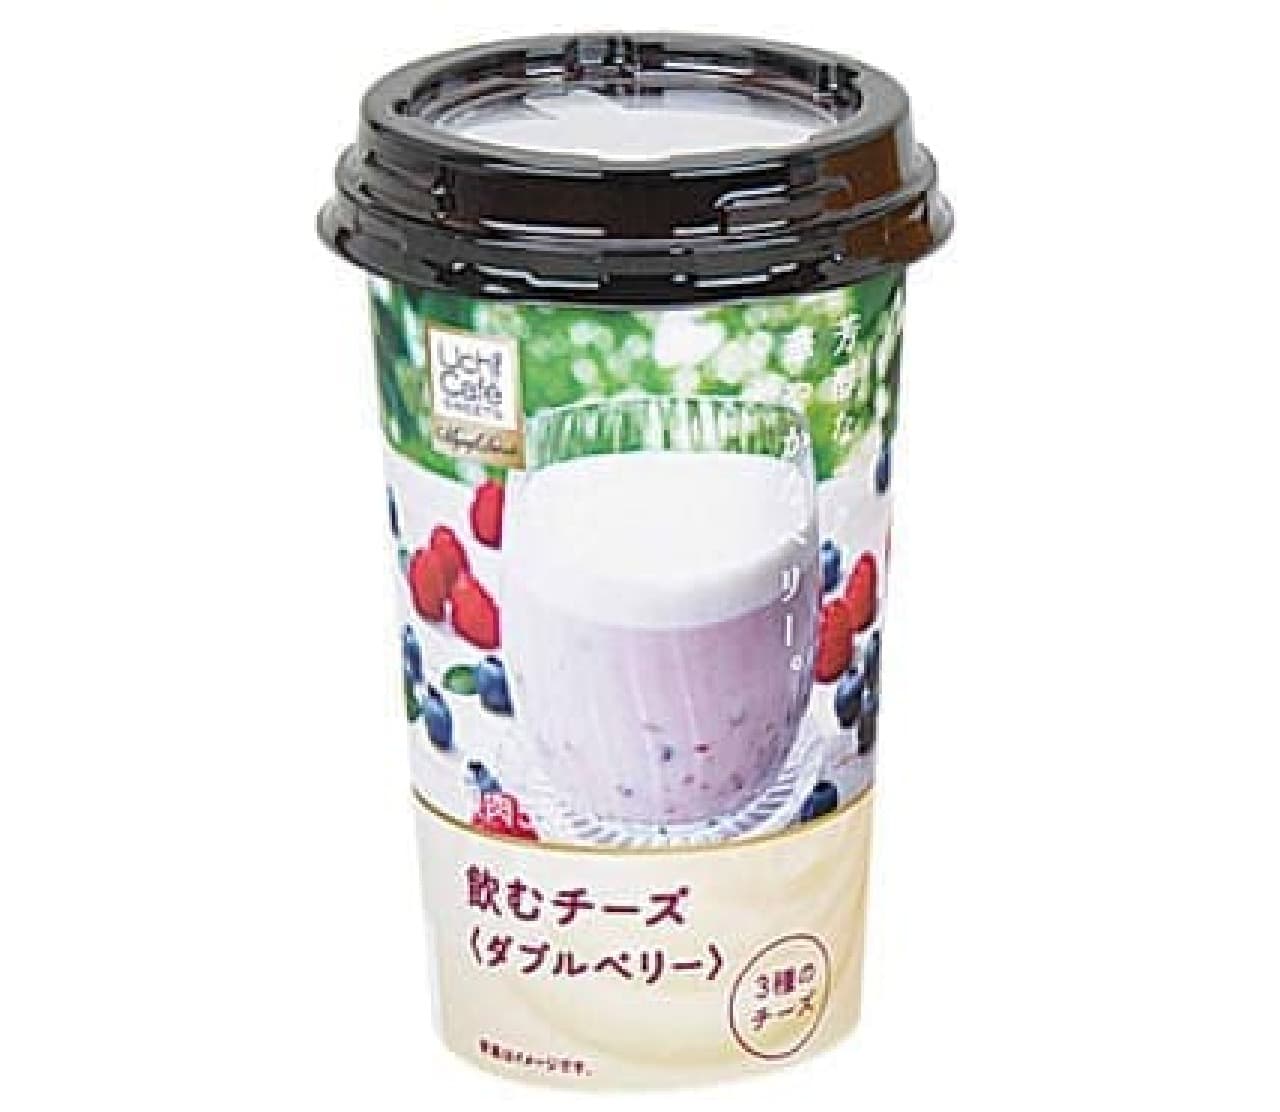 Uchi Cafe Drinking cheese [Double berry]